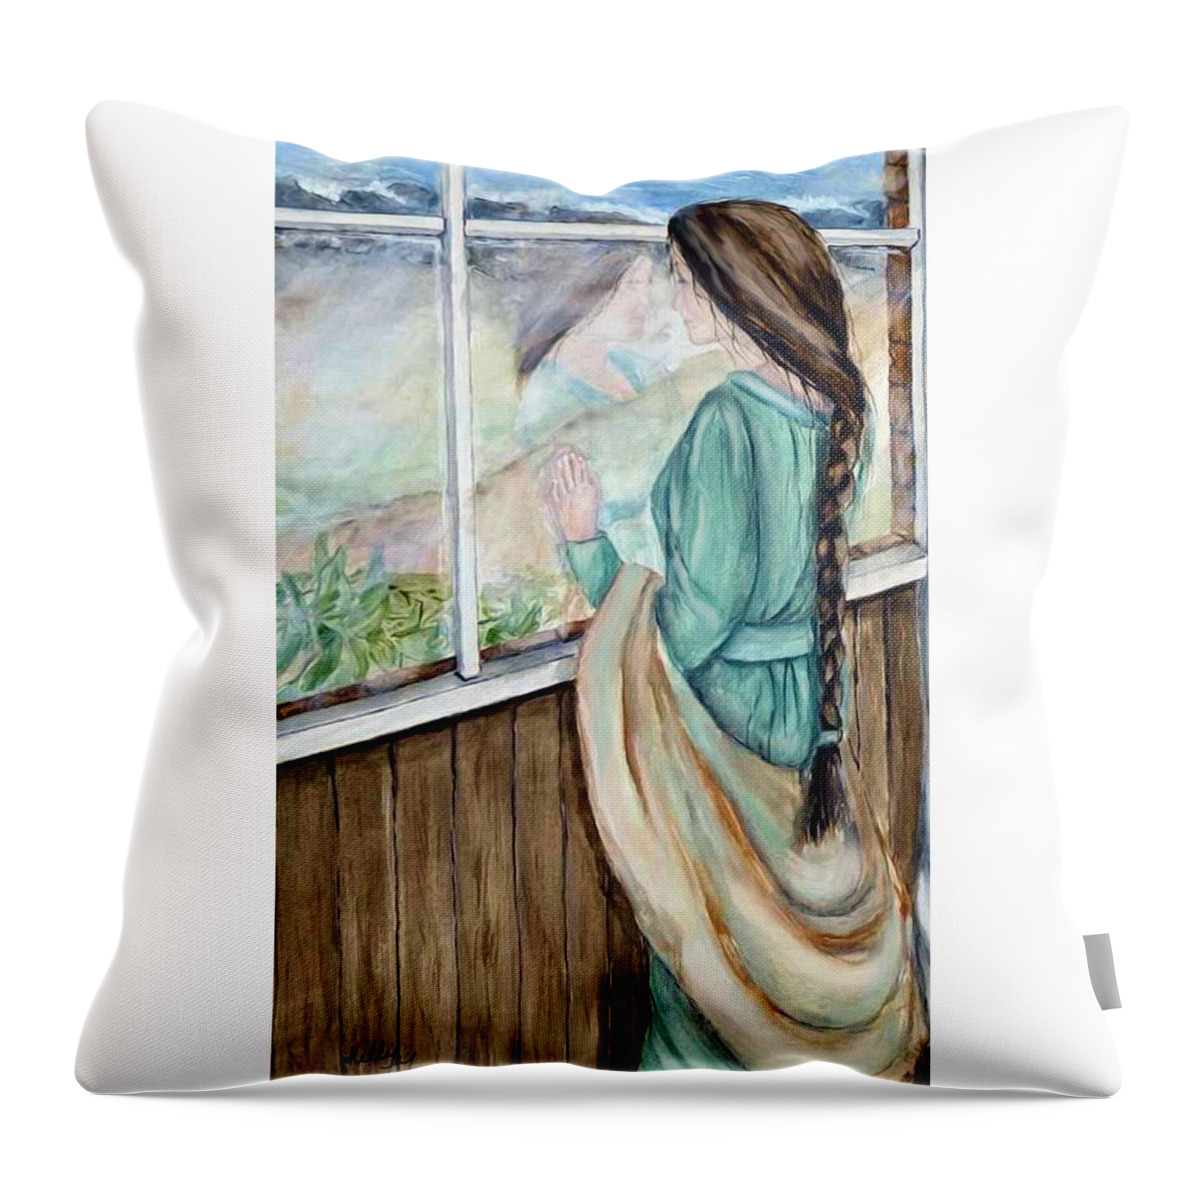 Young Girl Throw Pillow featuring the painting Waiting For Her Dreams by Kelly Mills